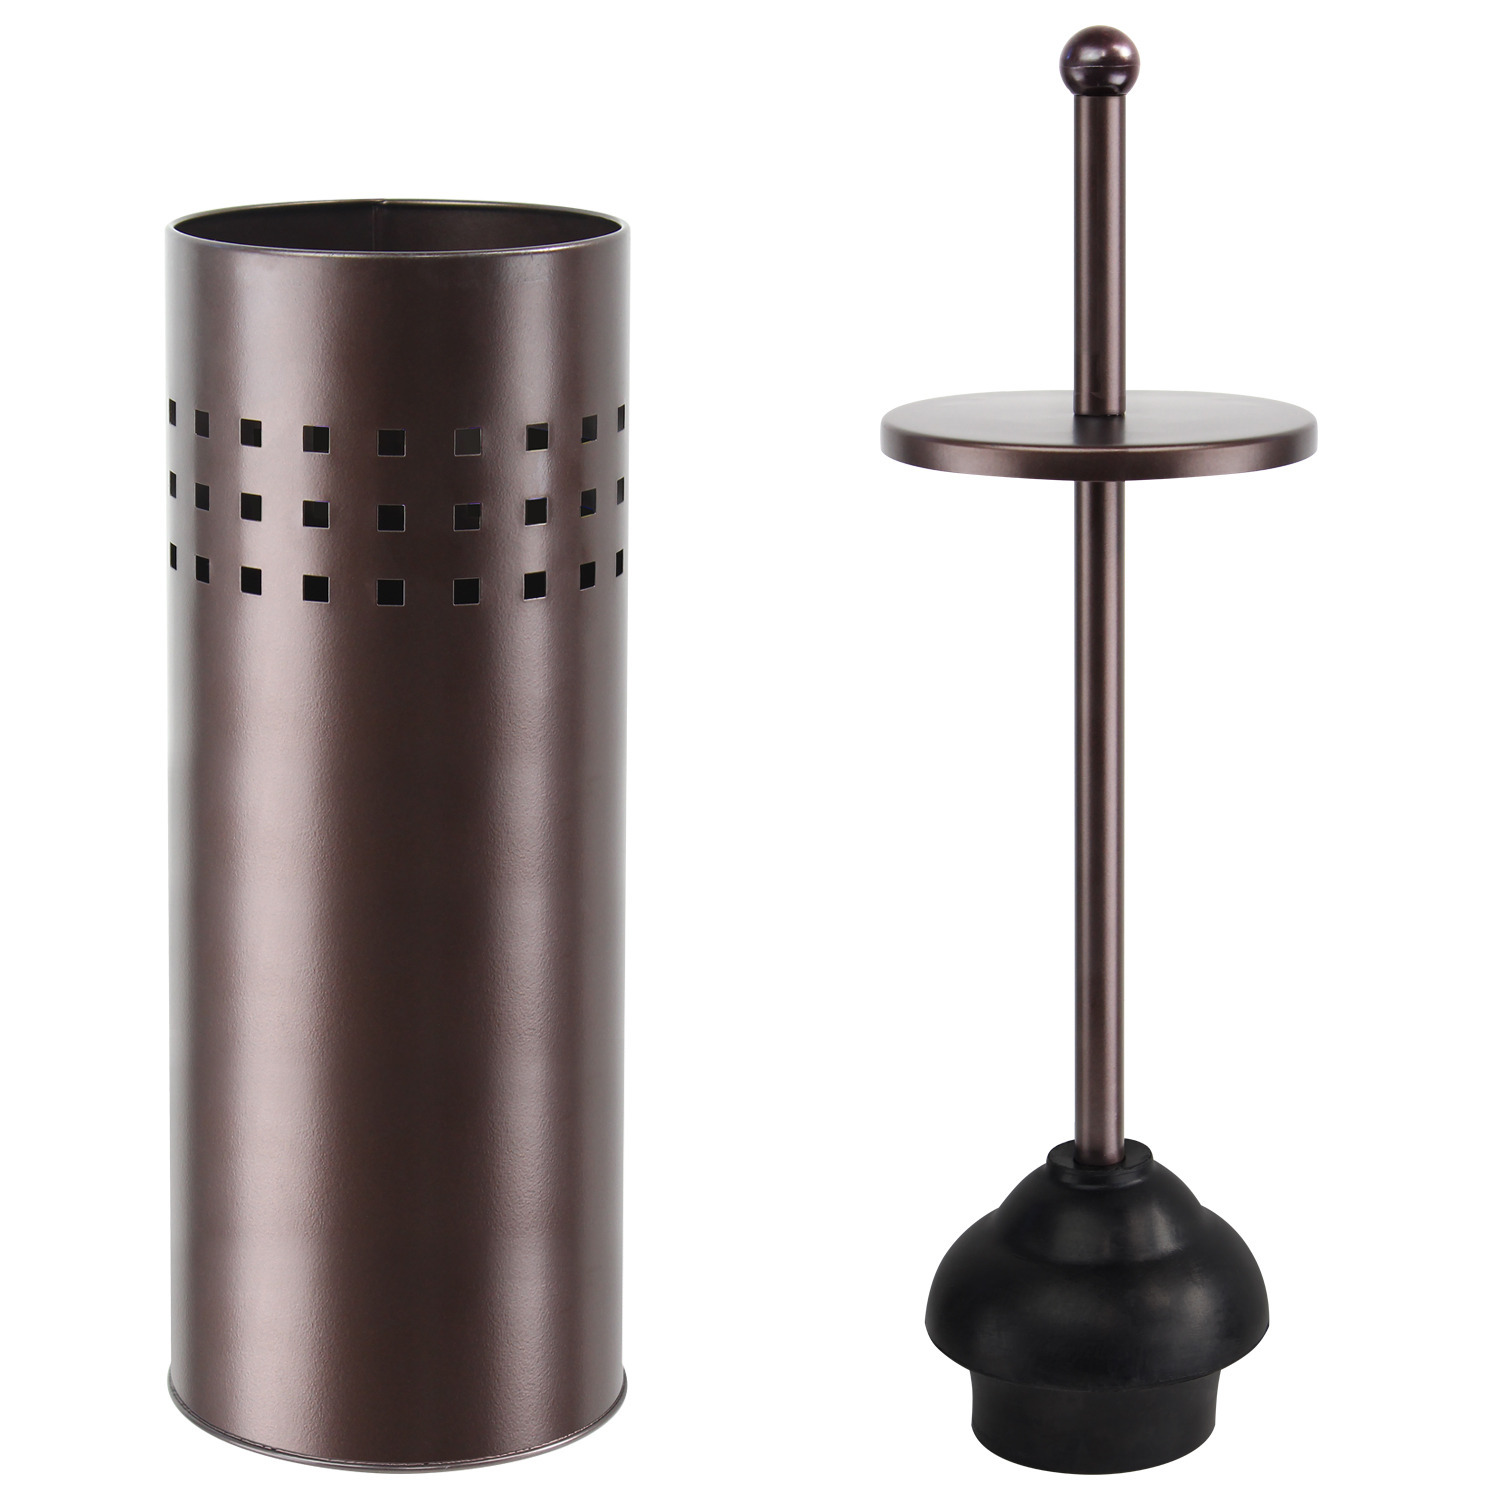 Toilet Plunger with Holder for Bathroom, Multi Drain Suitable also for Bathtubs, Quick Dry, Bronze